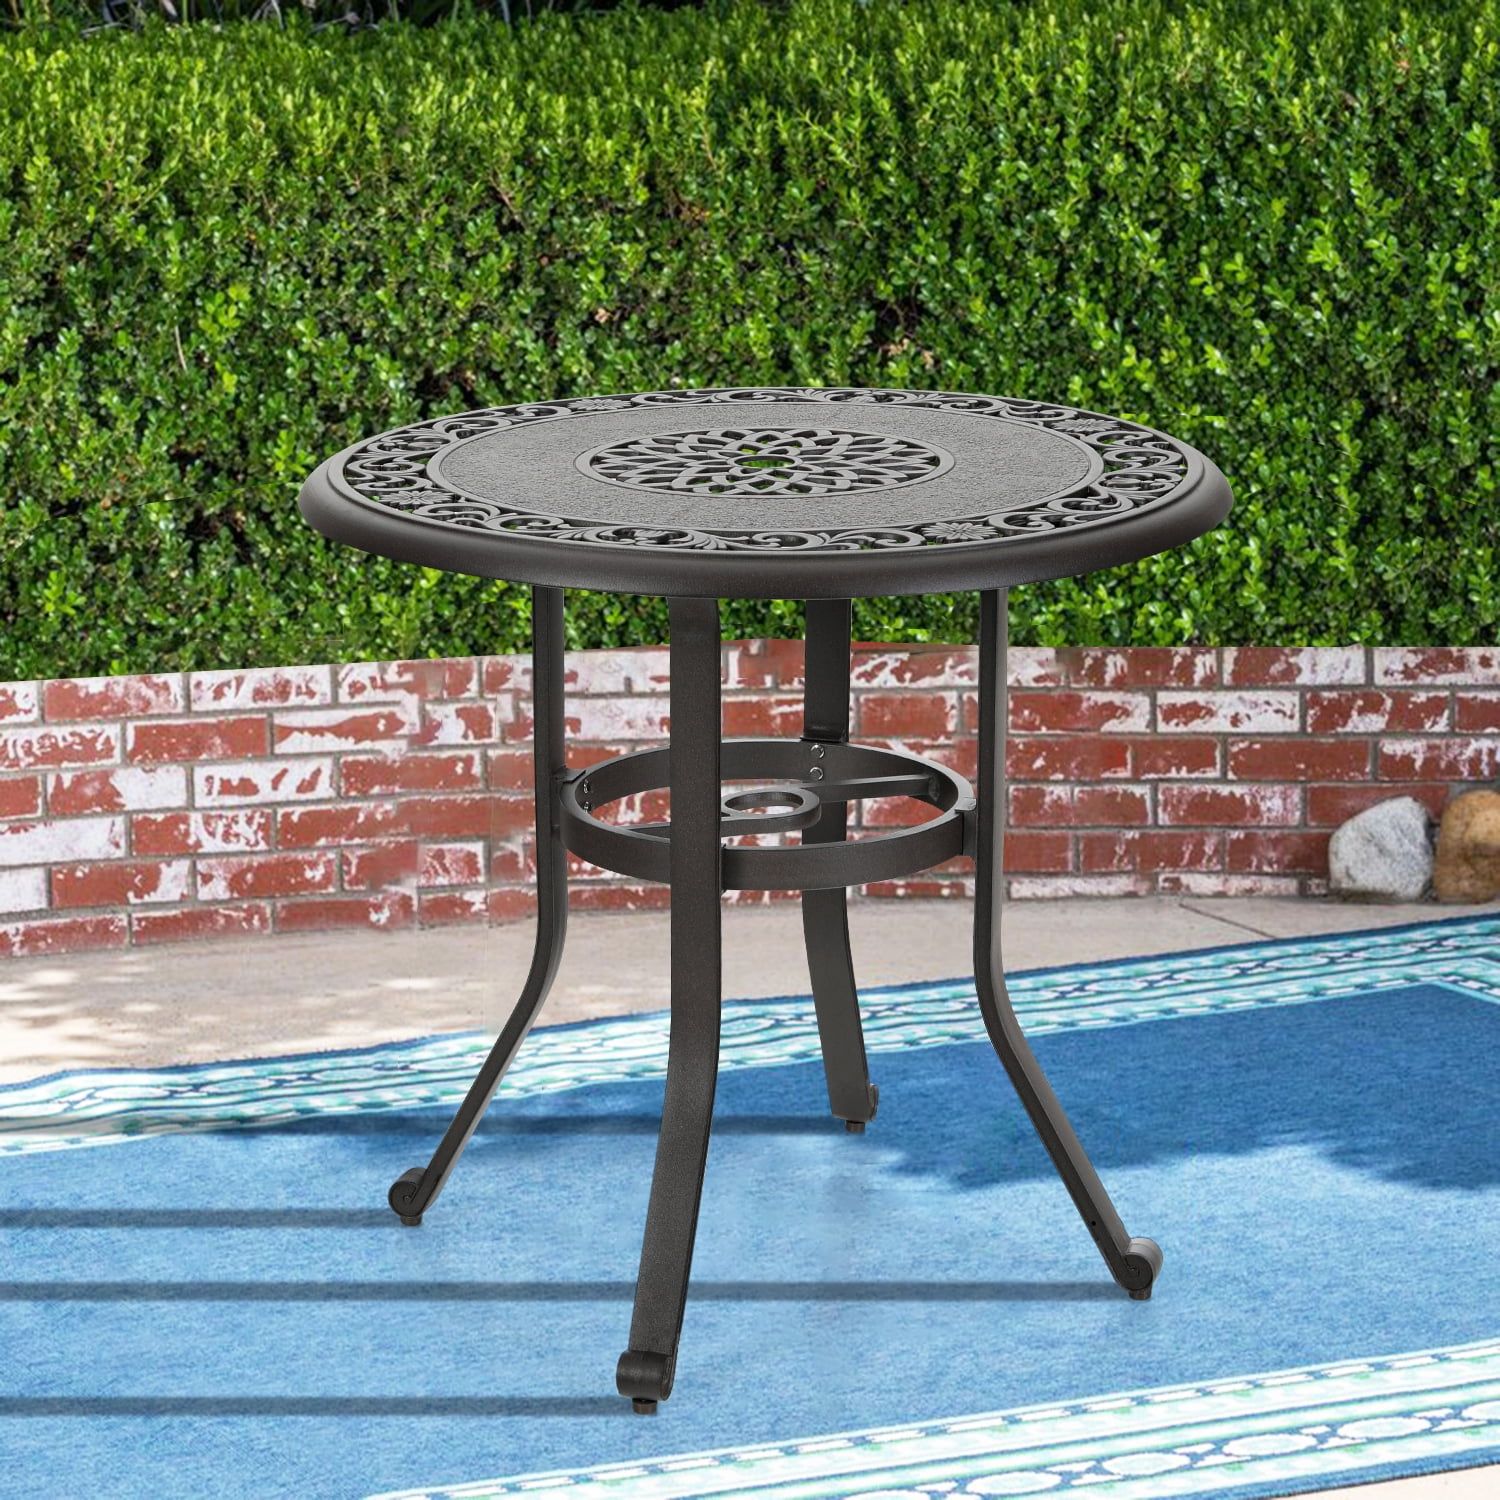 Mf Studio 32" Cast Aluminum Patio Outdoor Bistro Table, Round Dining Pertaining To Round Steel Patio Coffee Tables (Gallery 4 of 20)